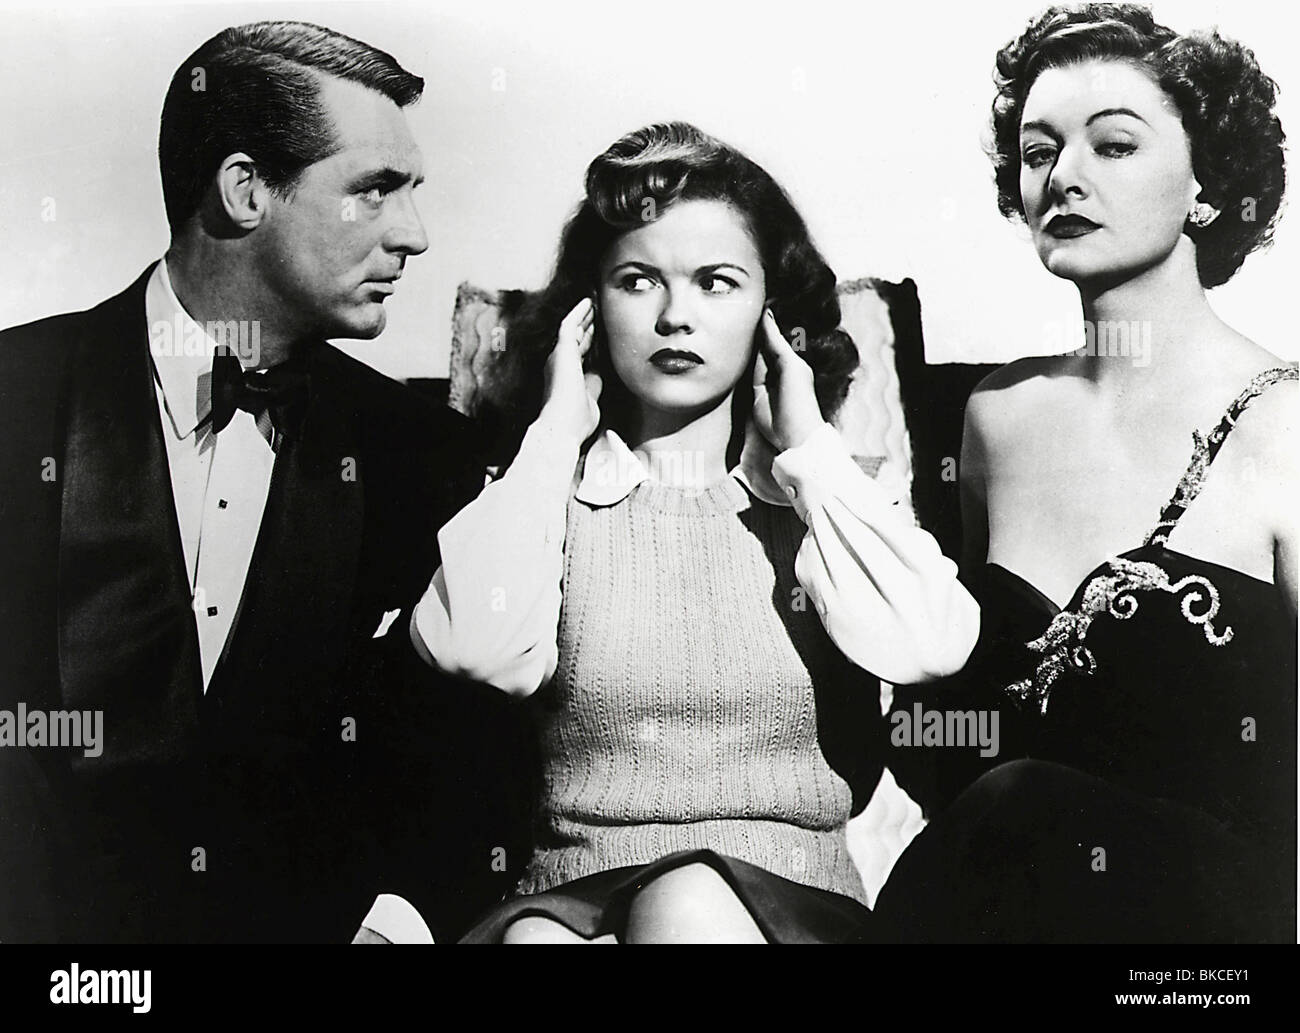 BACHELOR KNIGHT (1947) THE BACHELOR AND THE BOBBYSOXER (ALT) CARY GRANT, SHIRLEY TEMPLE, MYRNA LOY BACH 003P Stock Photo